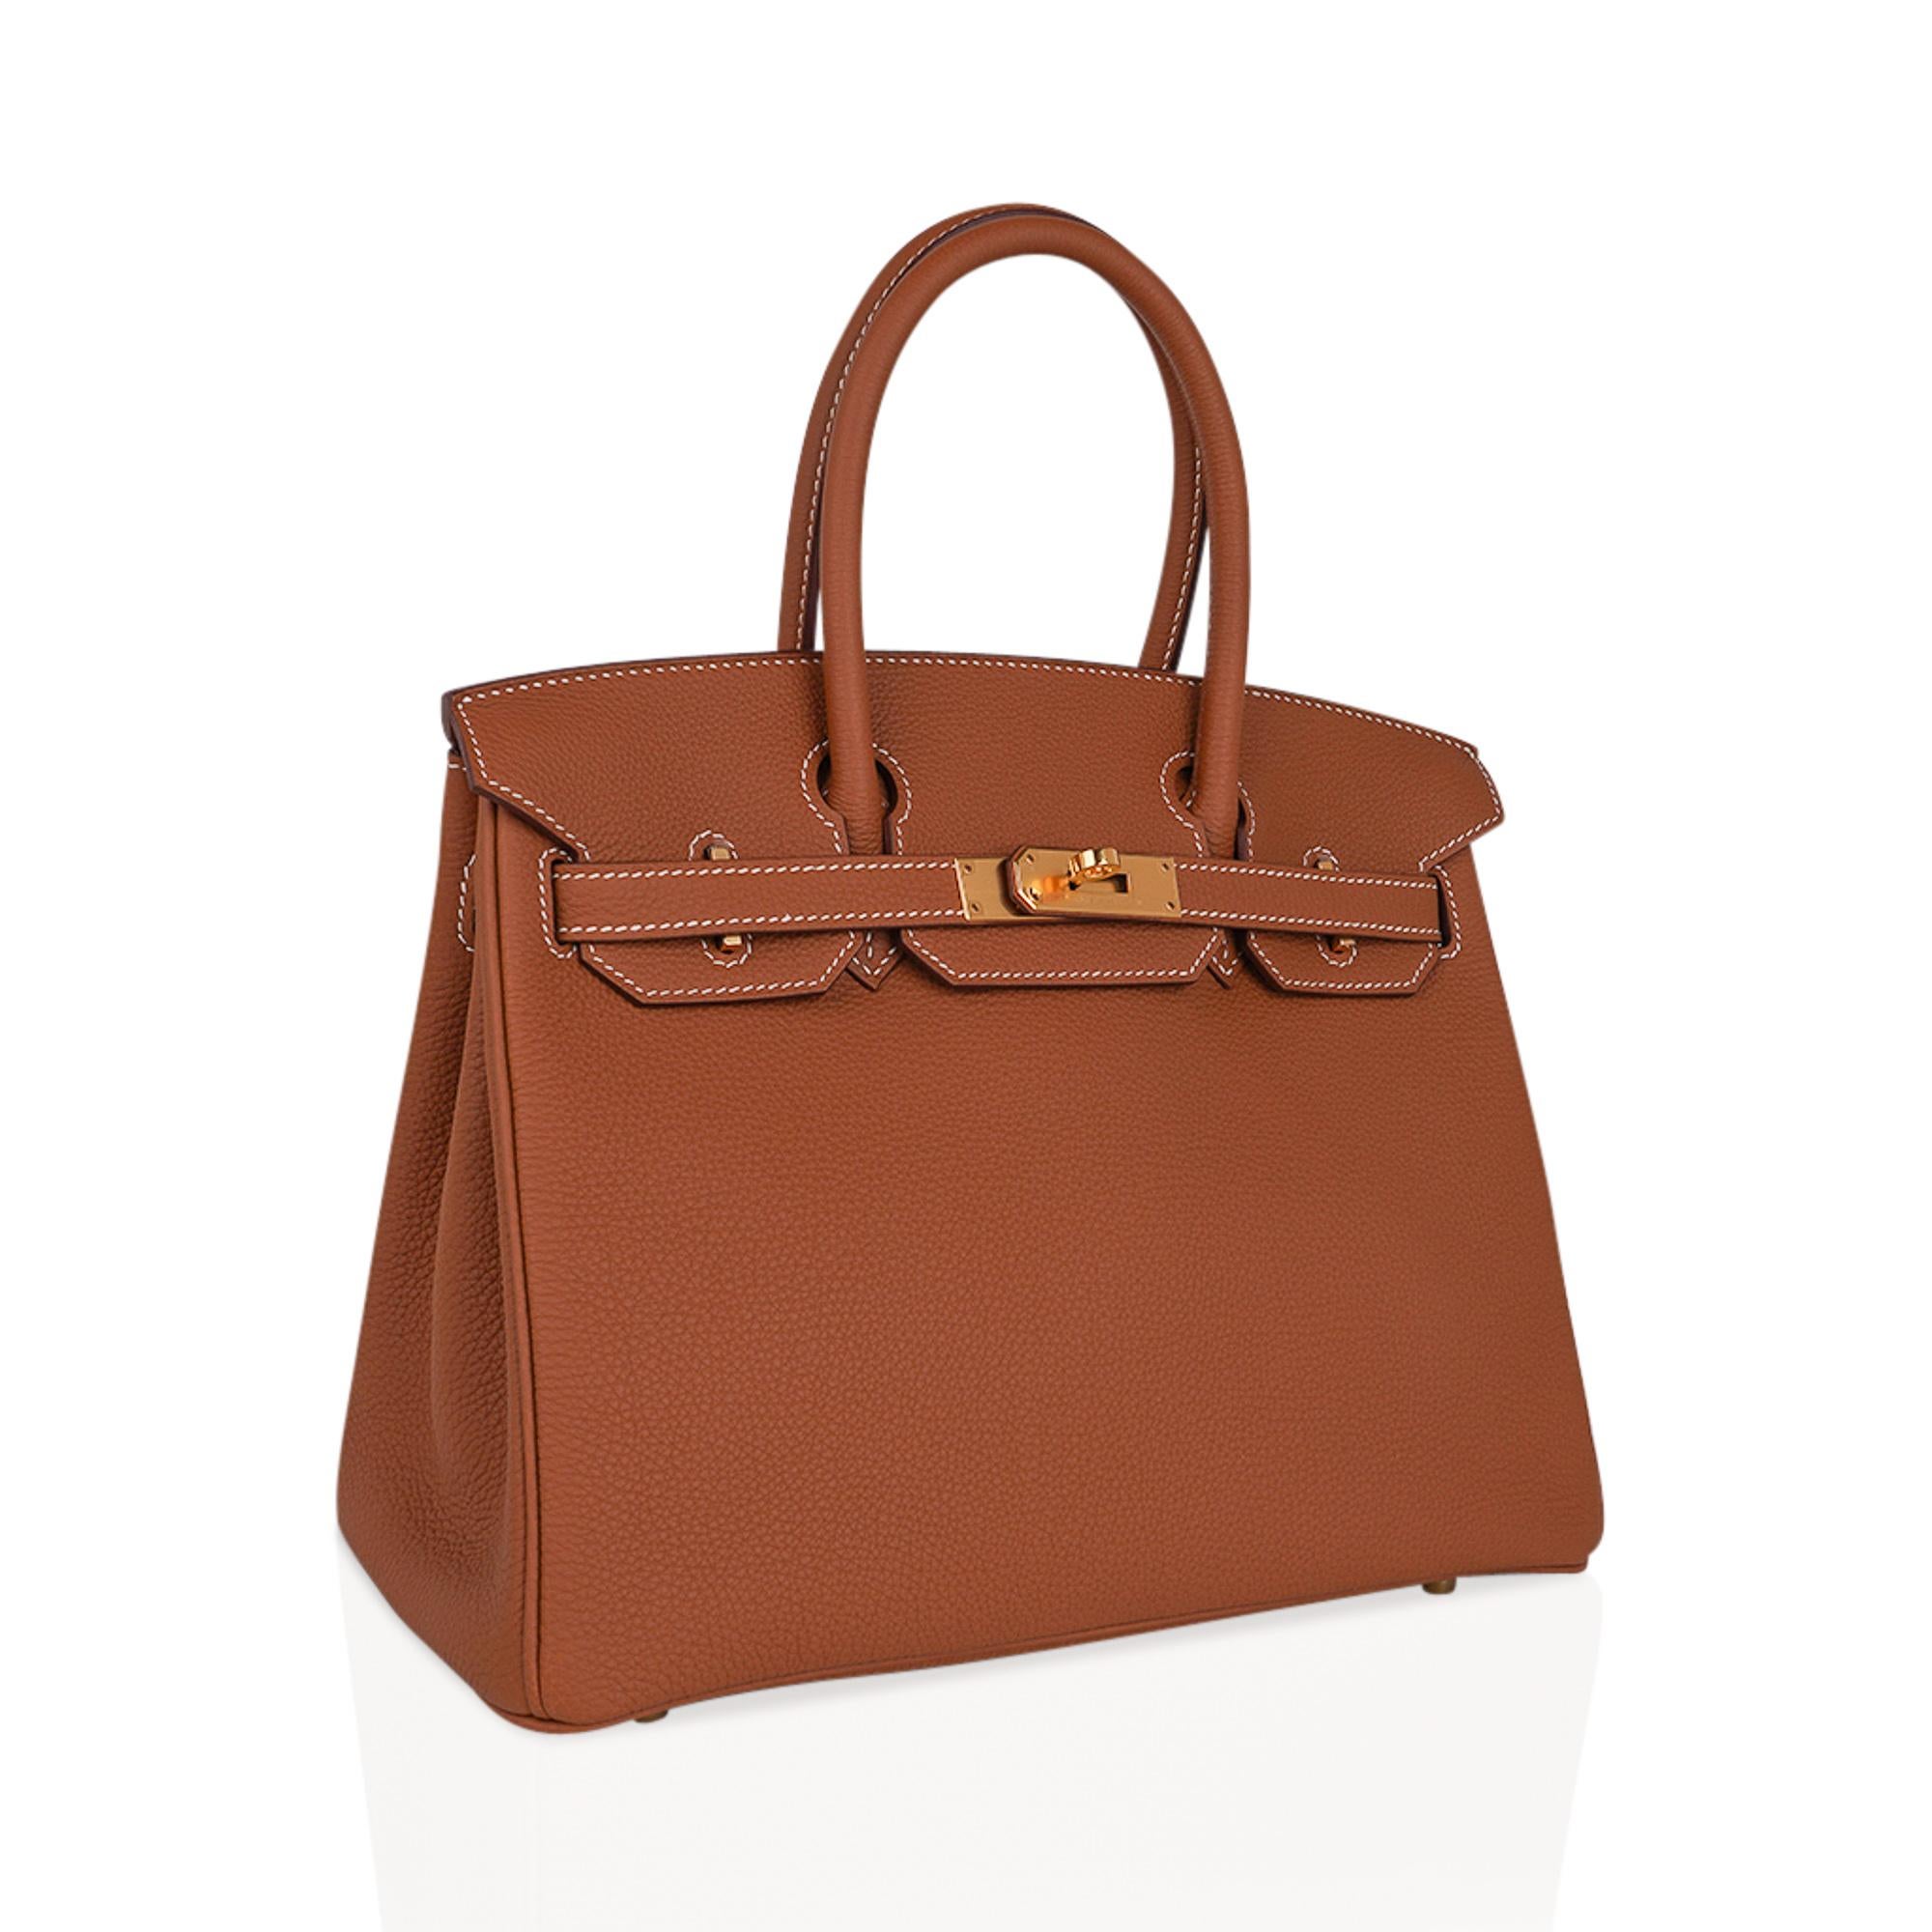 Mightychic offers an Hermes Birkin 30 bag featured in  classic Gold.
This always in demand coveted Hermes Birkin bag is timeless in Togo leather.
Accentuated with lush gold hardware.
Comes with the lock and keys in the clochette, sleepers, raincoat